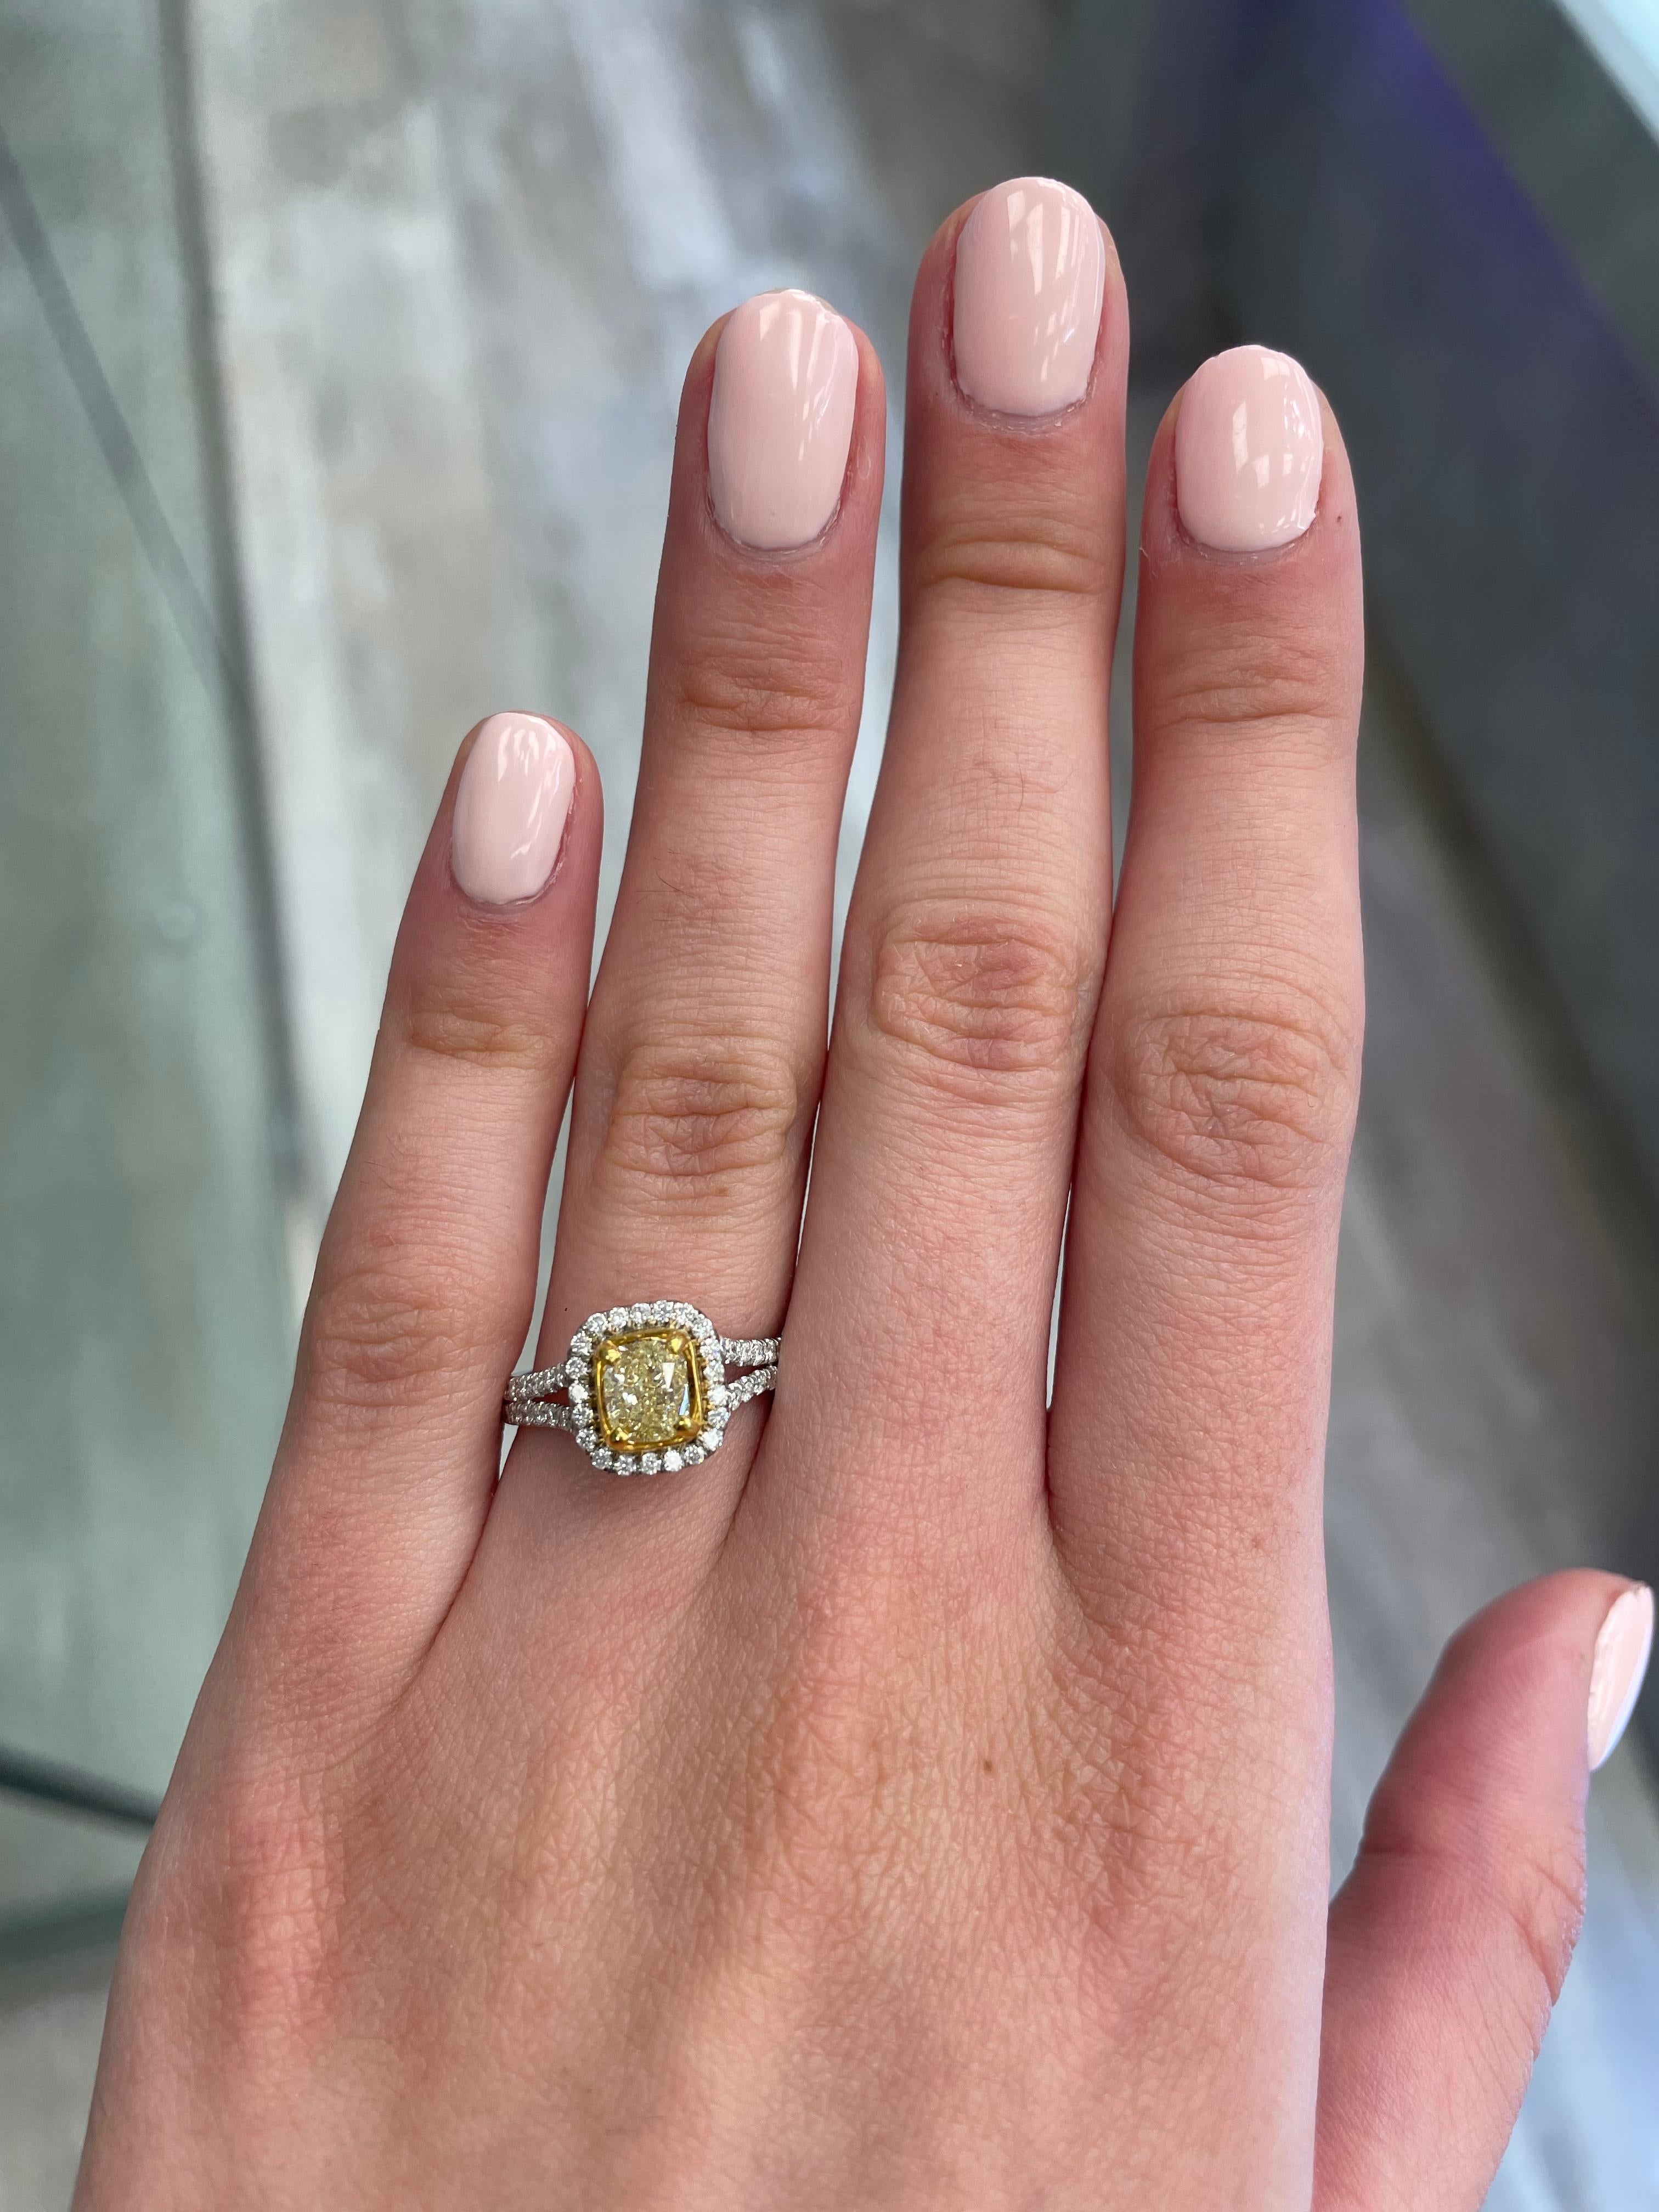 Stunning modern EGL certified yellow diamond with halo ring, two-tone 18k yellow and white gold. By Alexander Beverly Hills
1.46 carats total diamond weight.
1.00 carat cushion cut Fancy Intense Yellow color and VS2 clarity diamond, EGL graded.